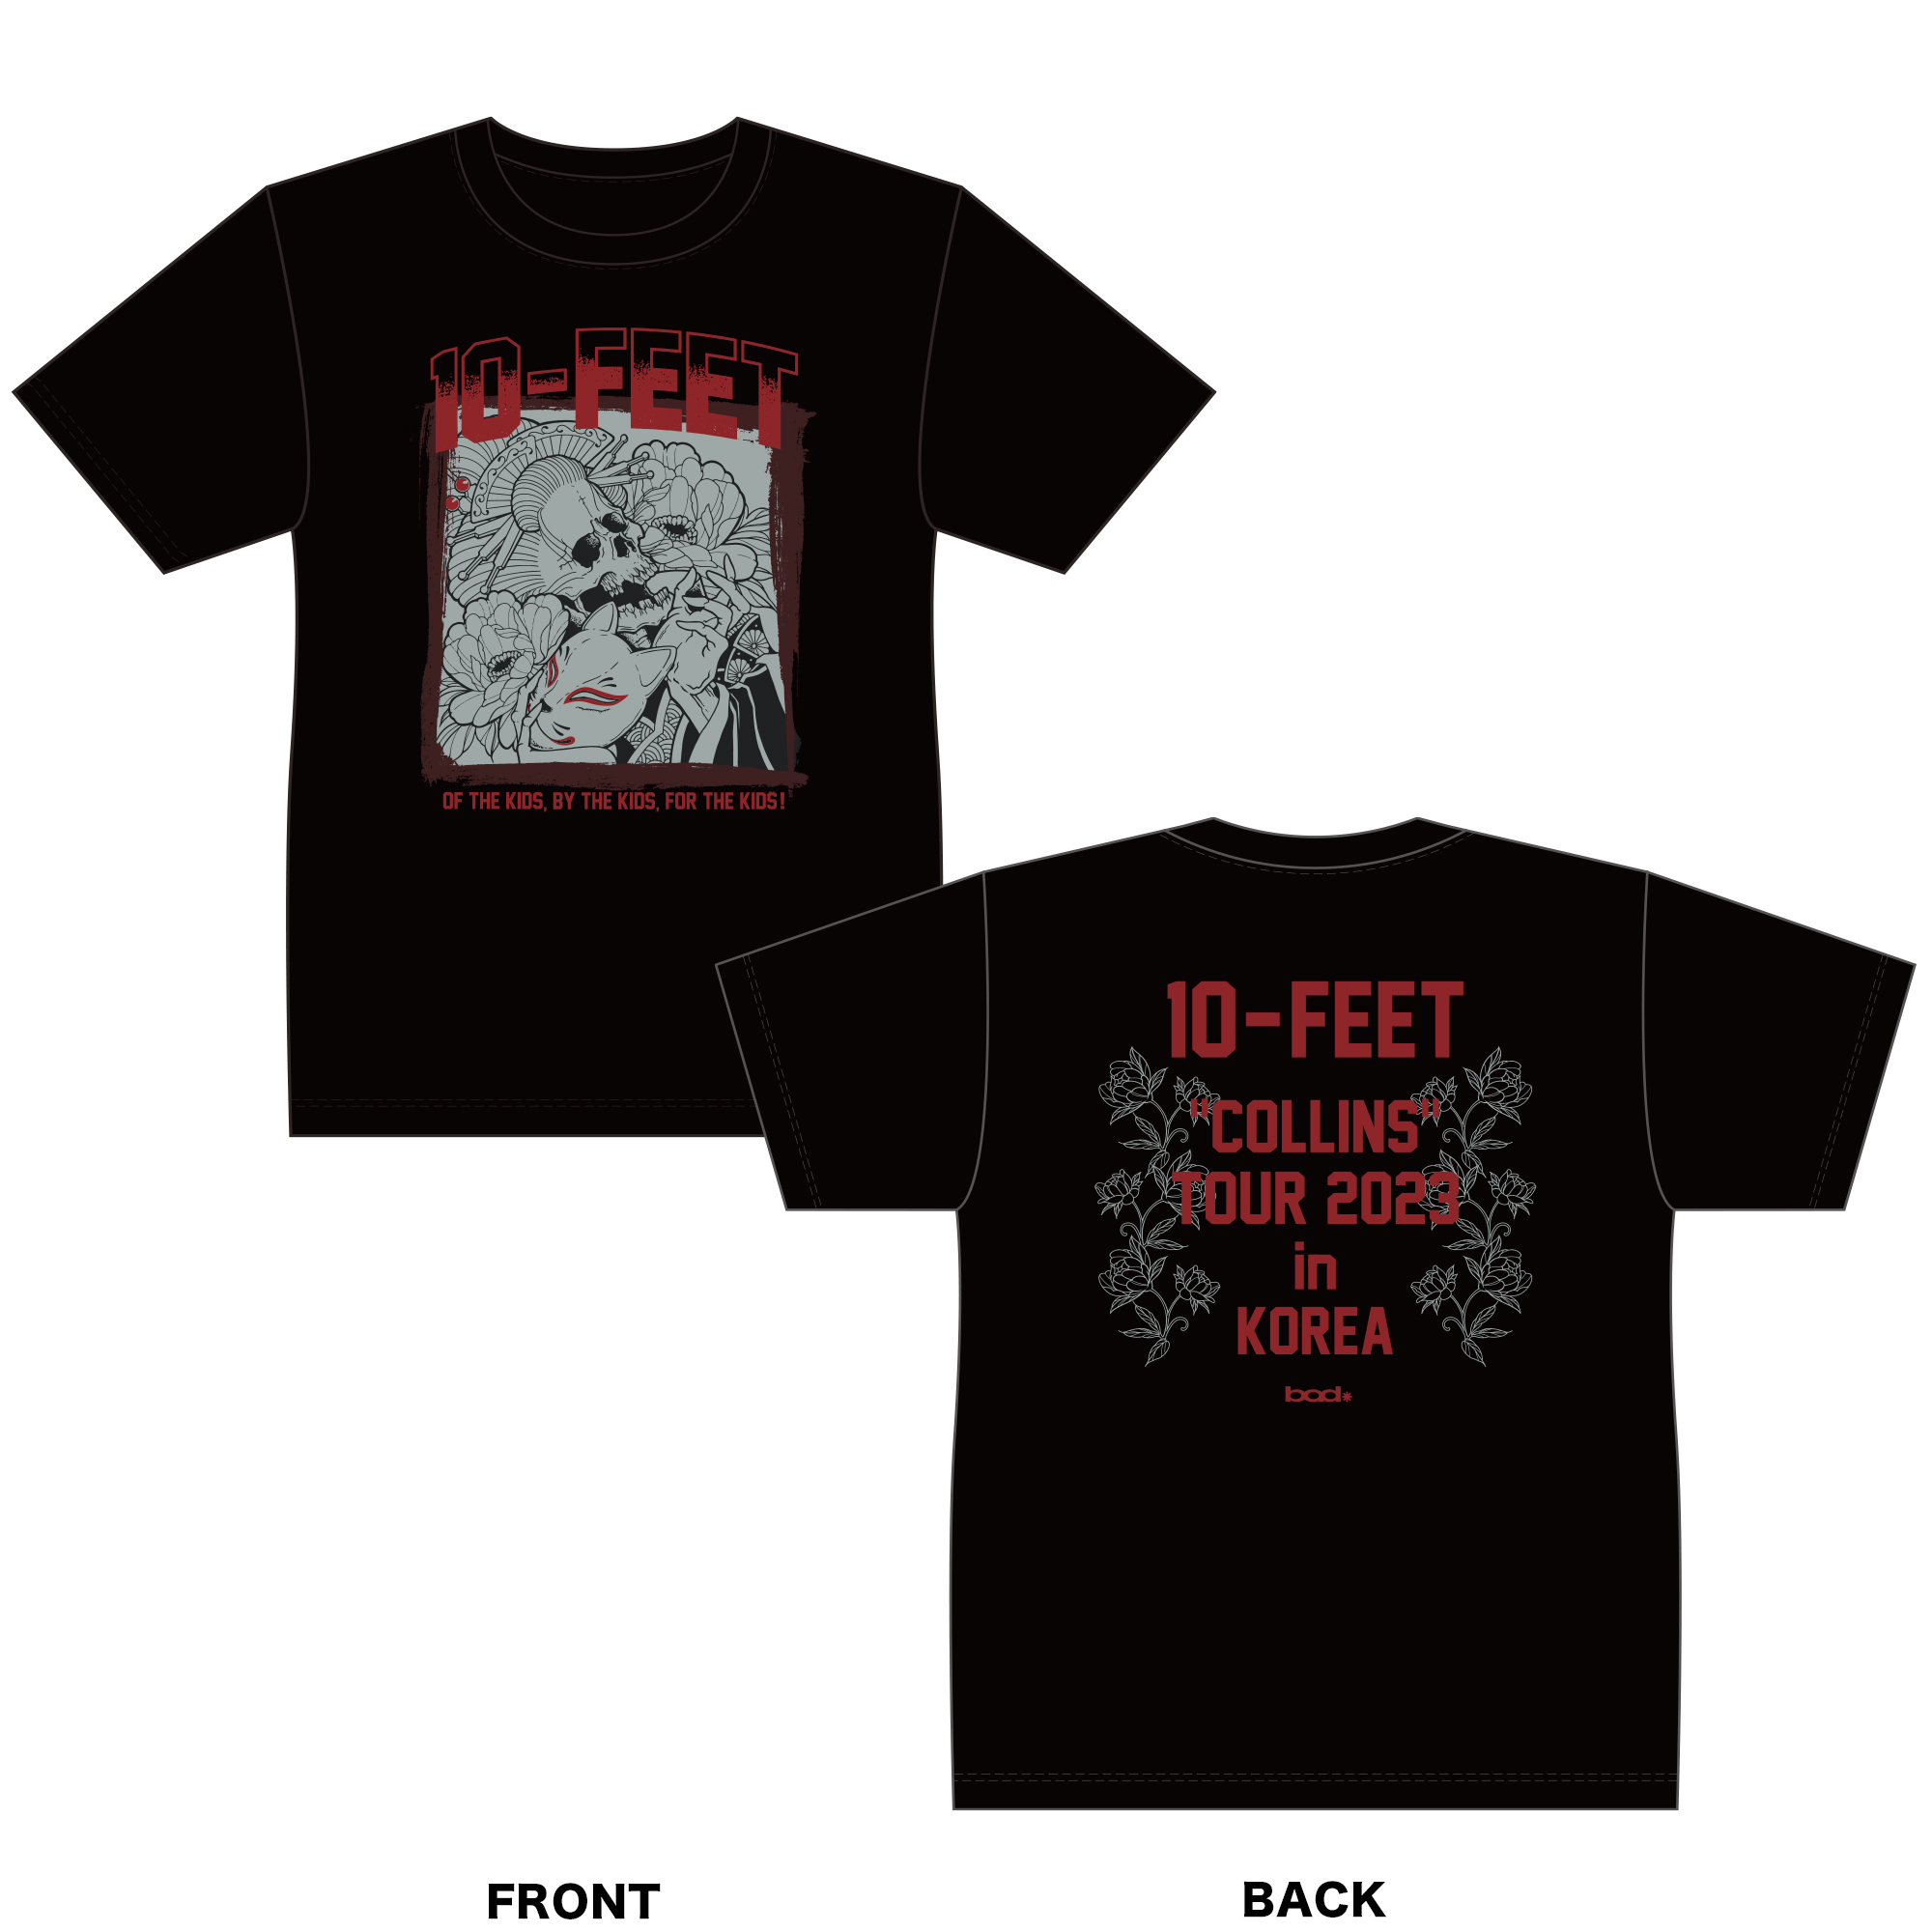 10-FEET MOBILE会員限定】プレゼント企画が決定！ | 10-FEET OFFICIAL WEB SITE